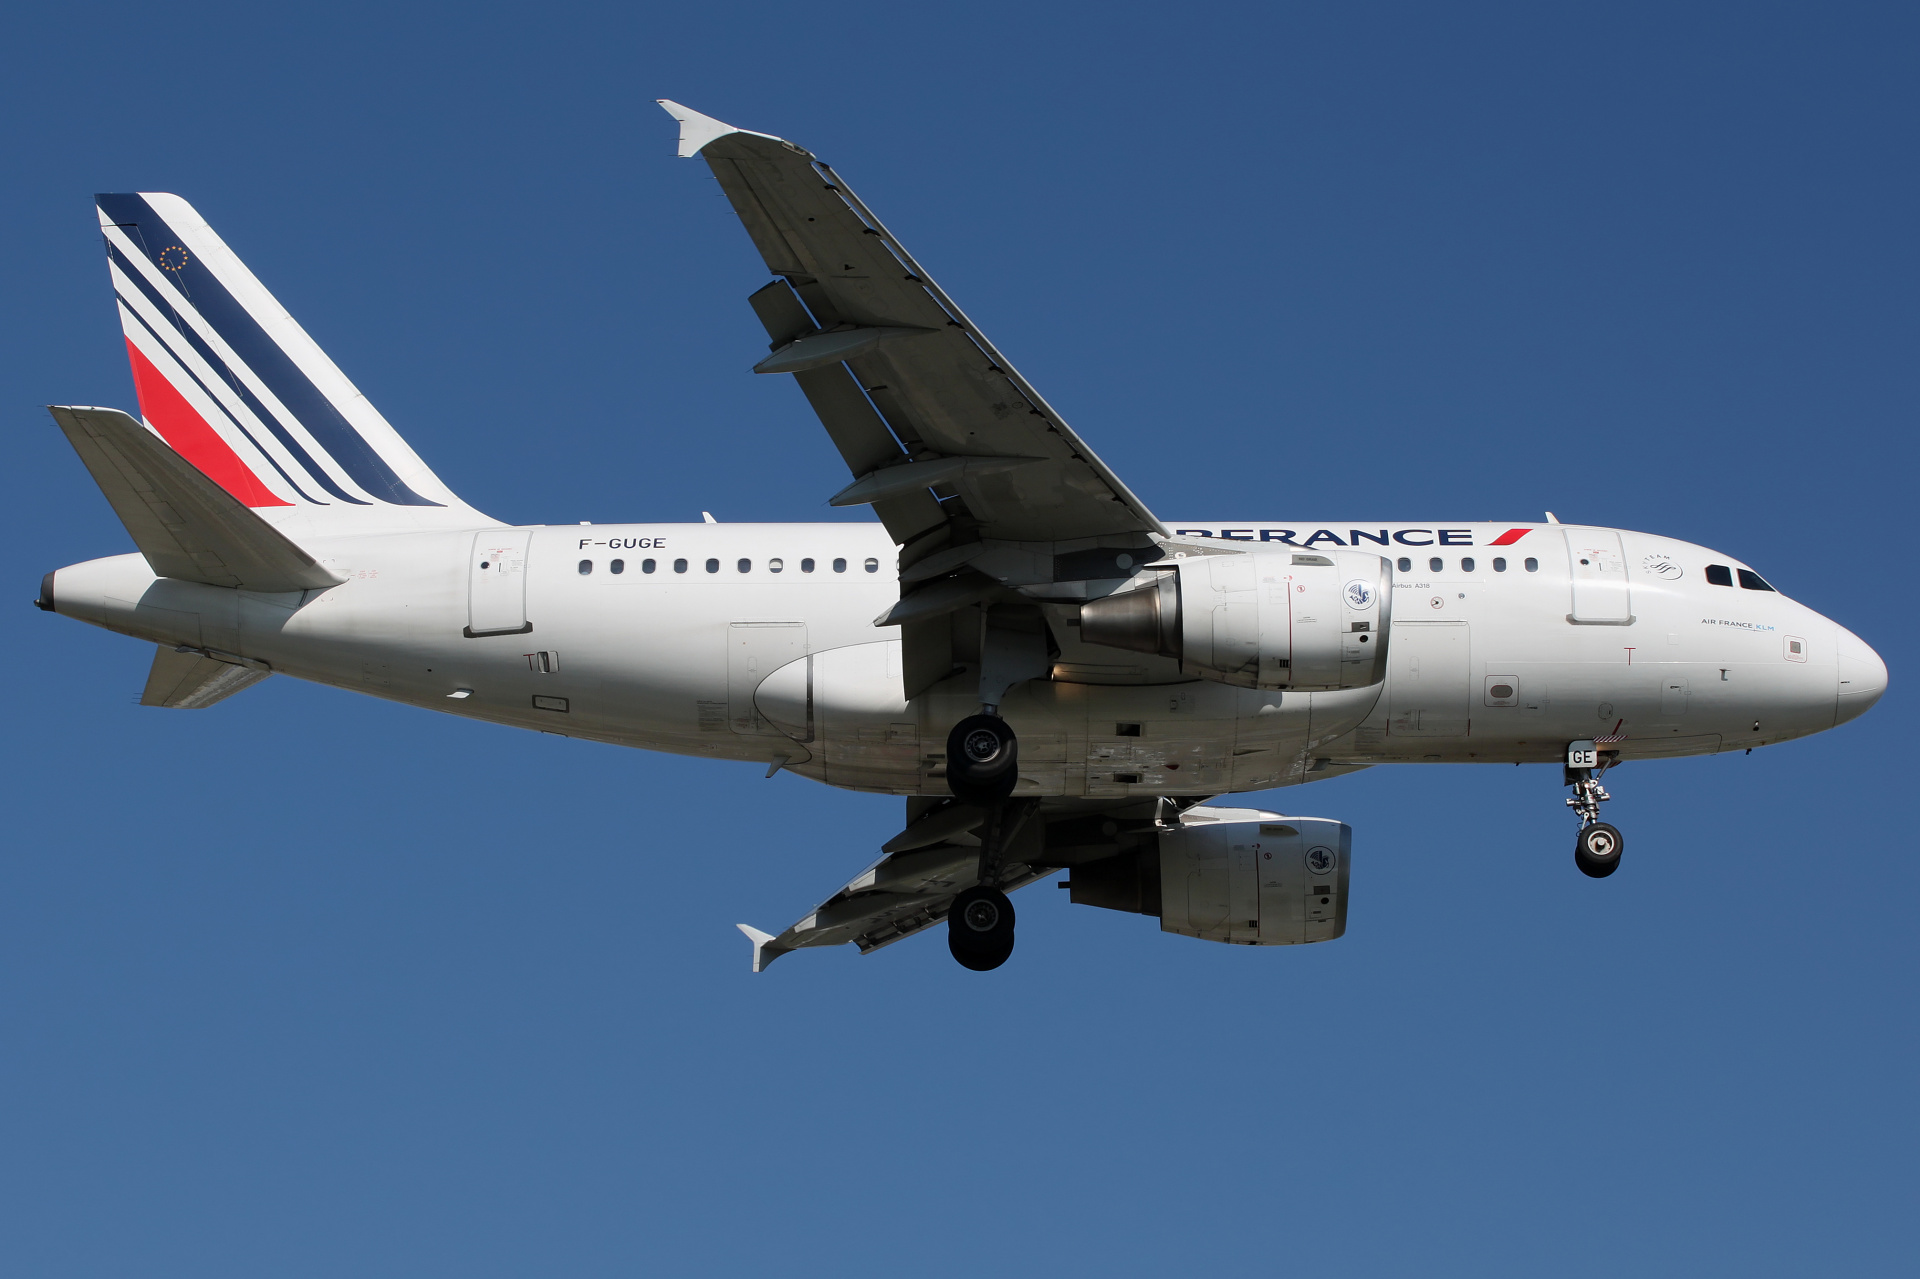 F-GUGE (Aircraft » EPWA Spotting » Airbus A318-100 » Air France)